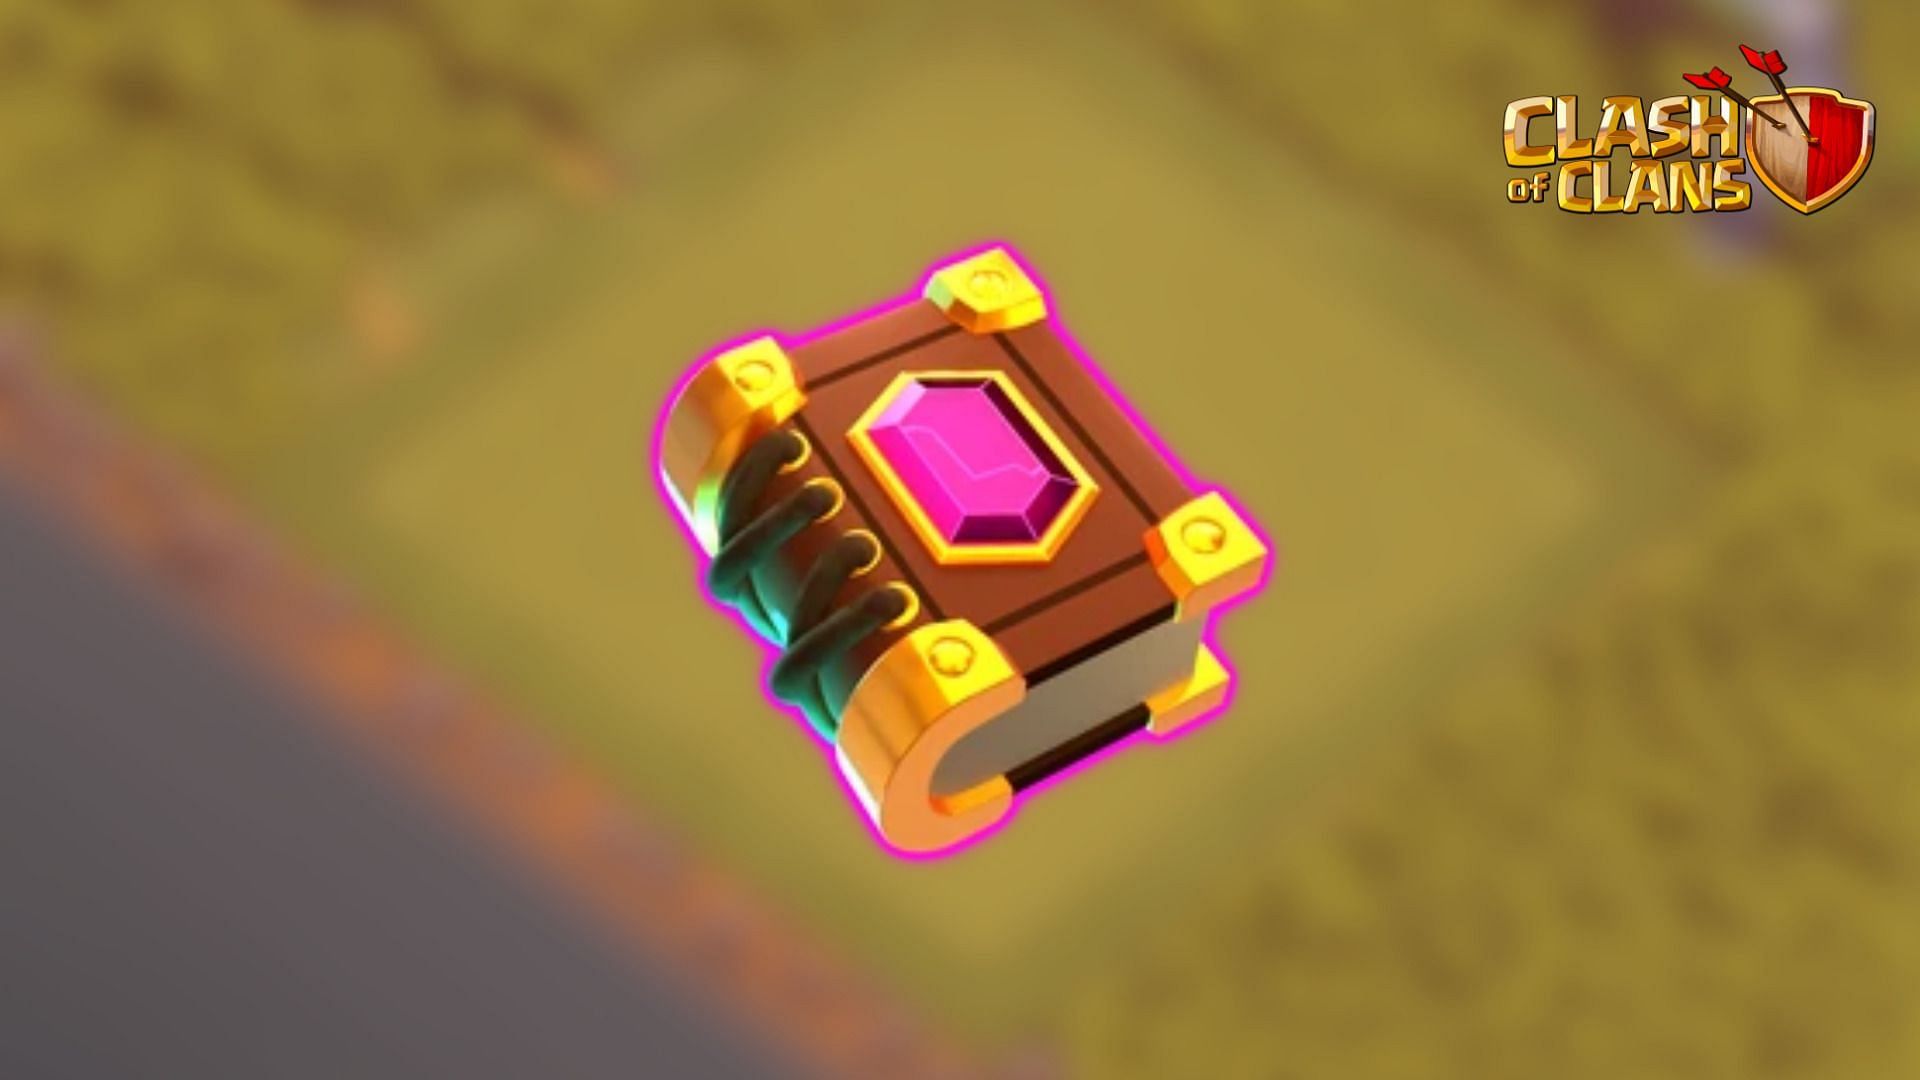 Eternal Tome (Image via Supercell)